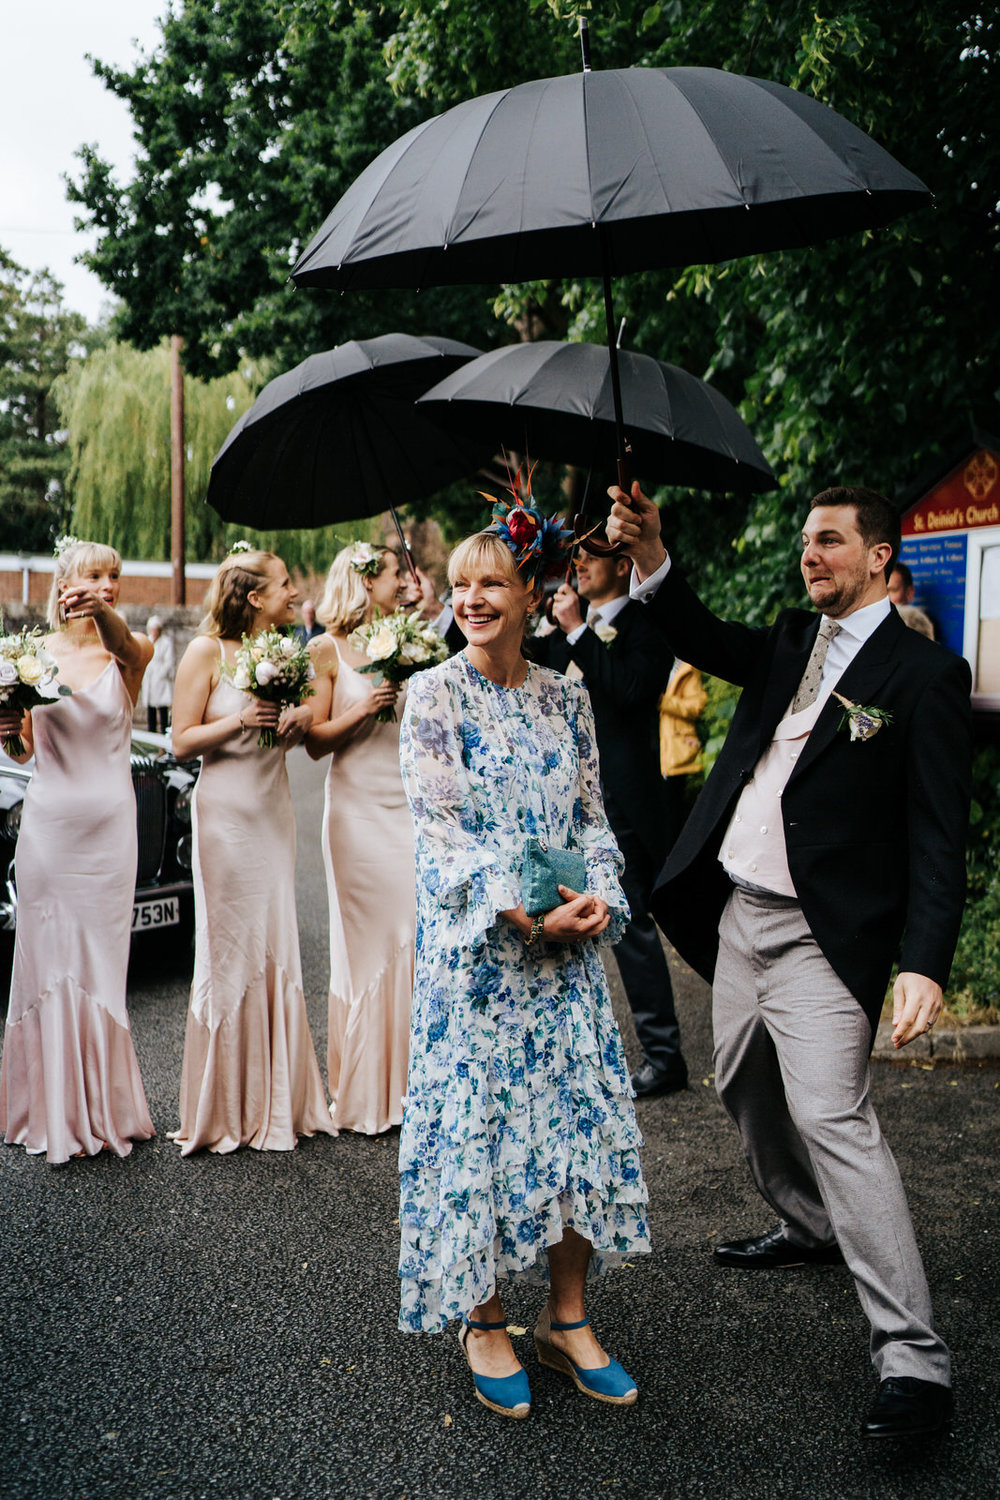  Mother of the bride and bridesmaids stand, smiling, underneath umbrellas as they wait for the bride to exit her car 